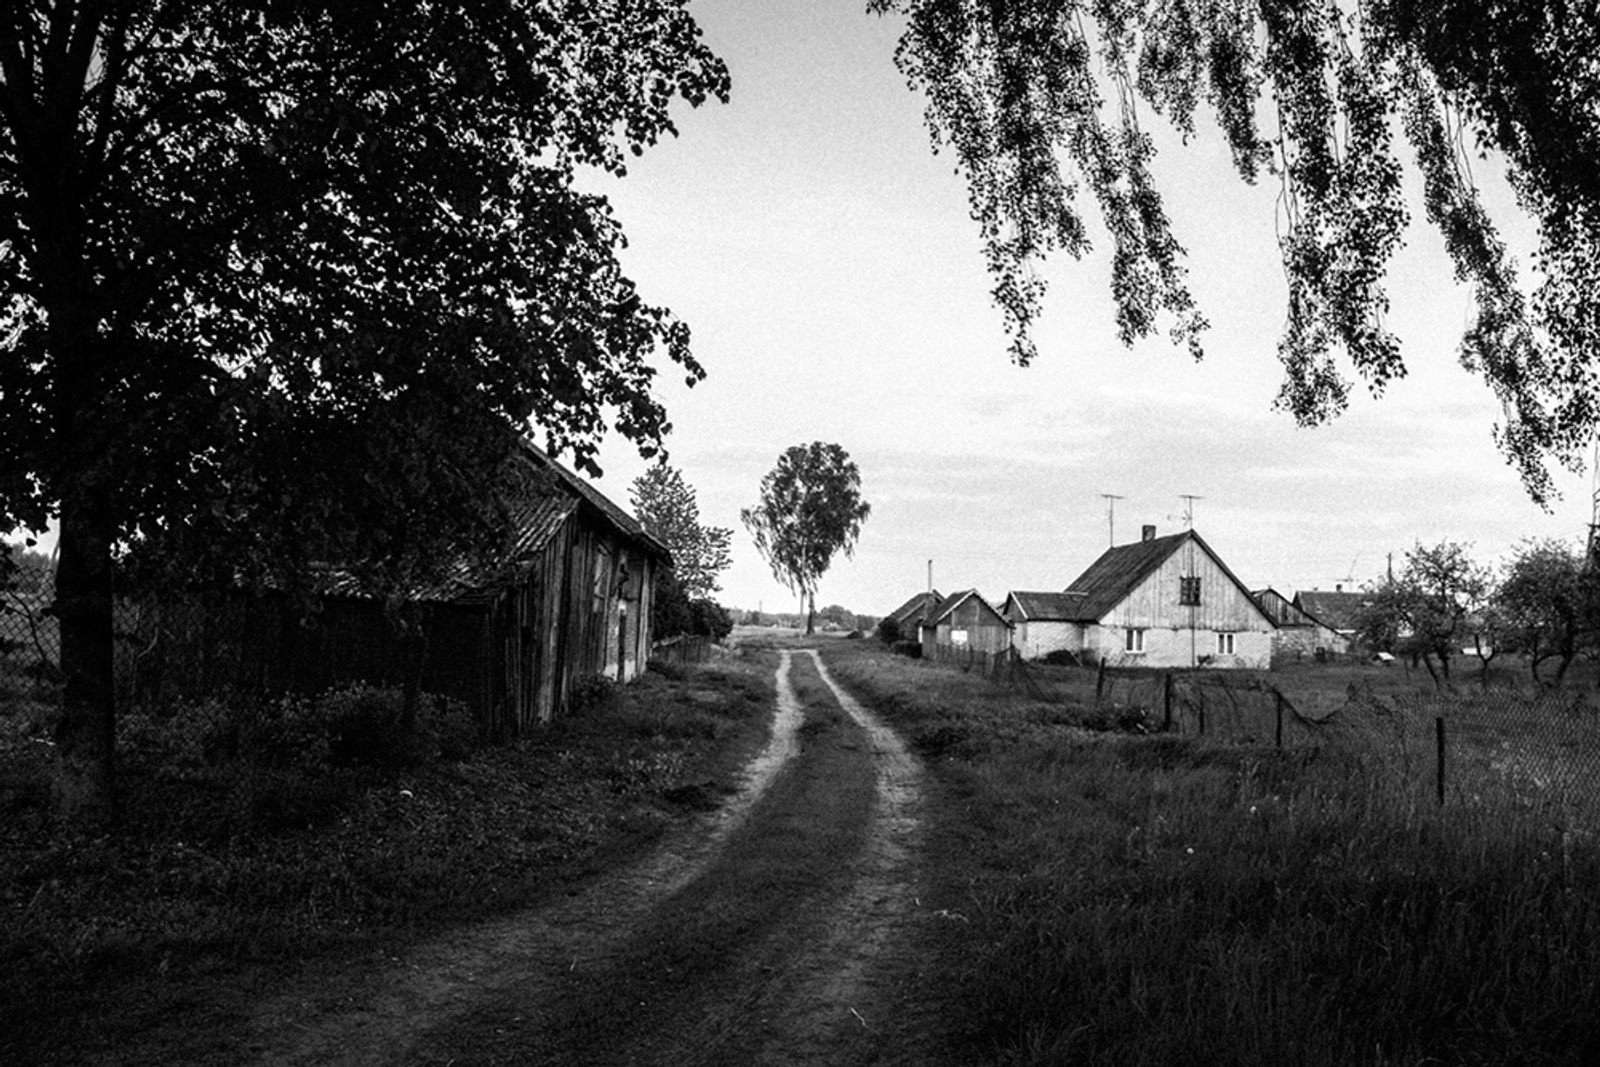 © Hannes Jung - End of the road the small village of Anužiai close to the boarder to Kaliningrad. Lithuania, Anužiai, 11th of May 2016.